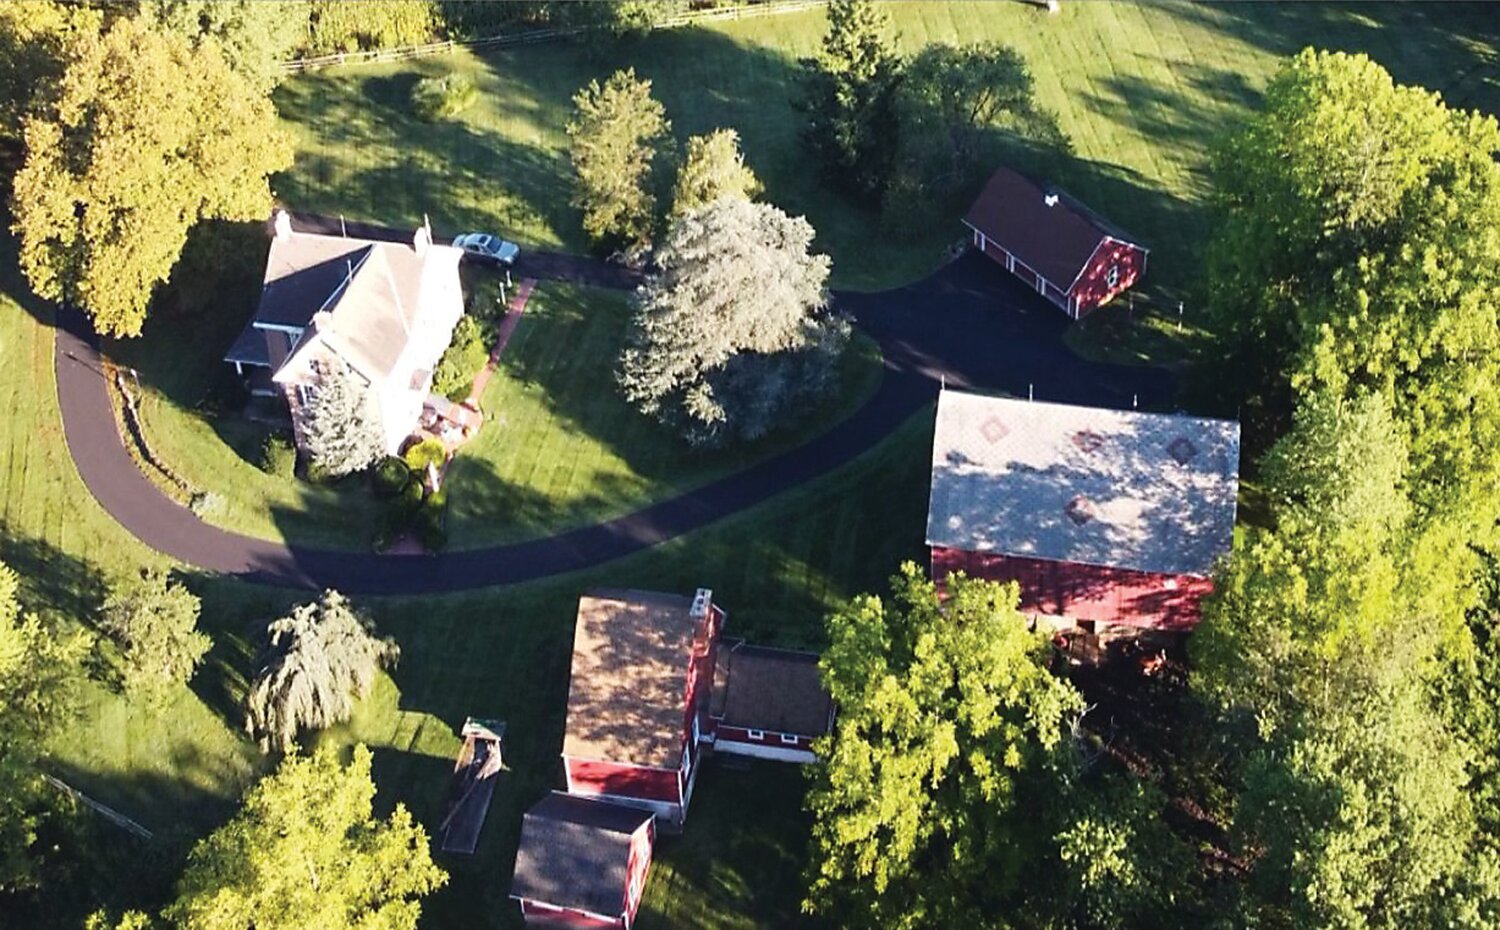 An aerial view of Sycamore Lane Farm shows the Hilltown Township property selected for this year’s Bucks County Designer House & Gardens showcase.